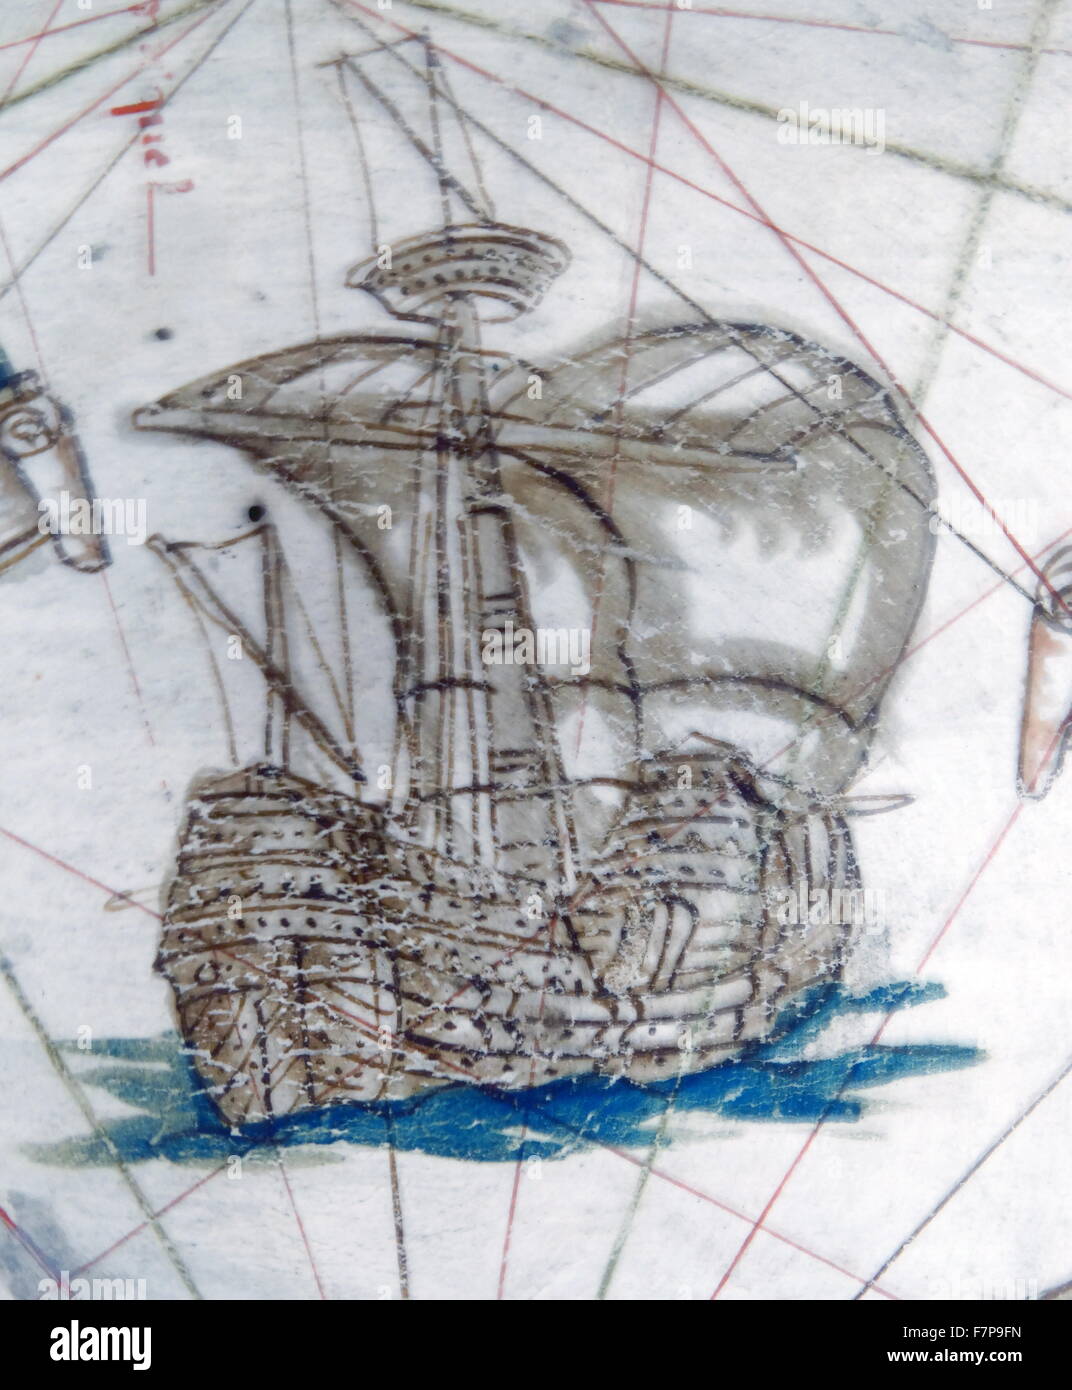 Renaissance map of Europe, Jacopo Russo, 1528, detail, showing a ship of 16th century Stock Photo